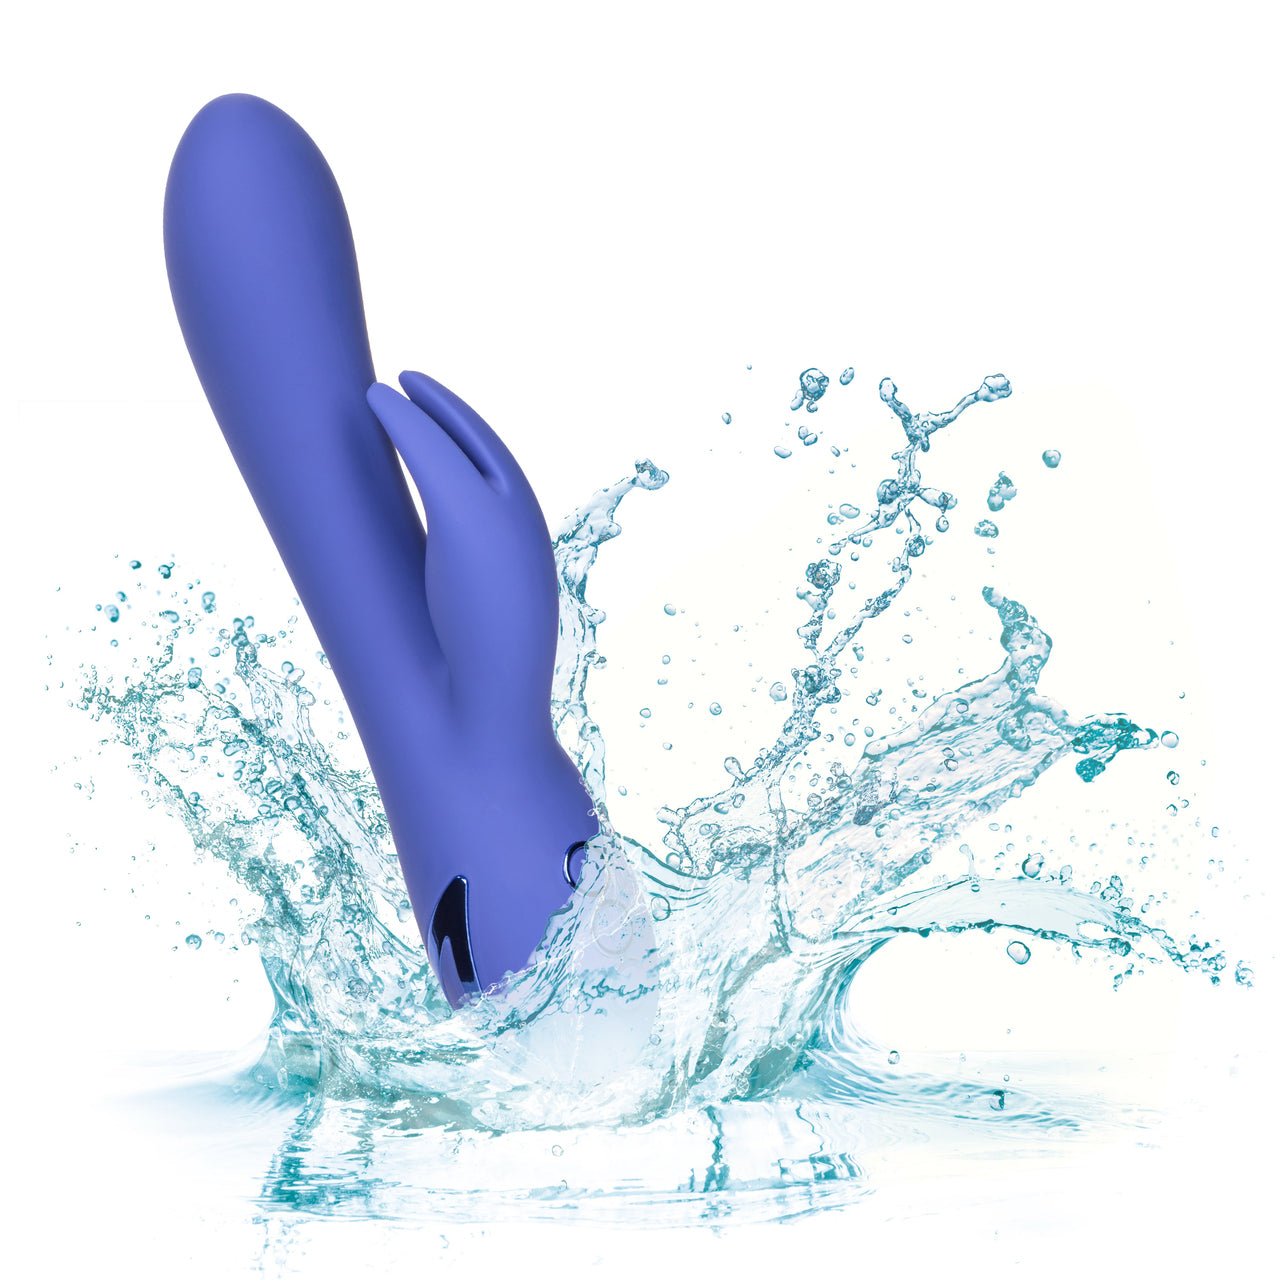 California Dreaming Beverly Hills Bunny Vibrator - Thorn & Feather